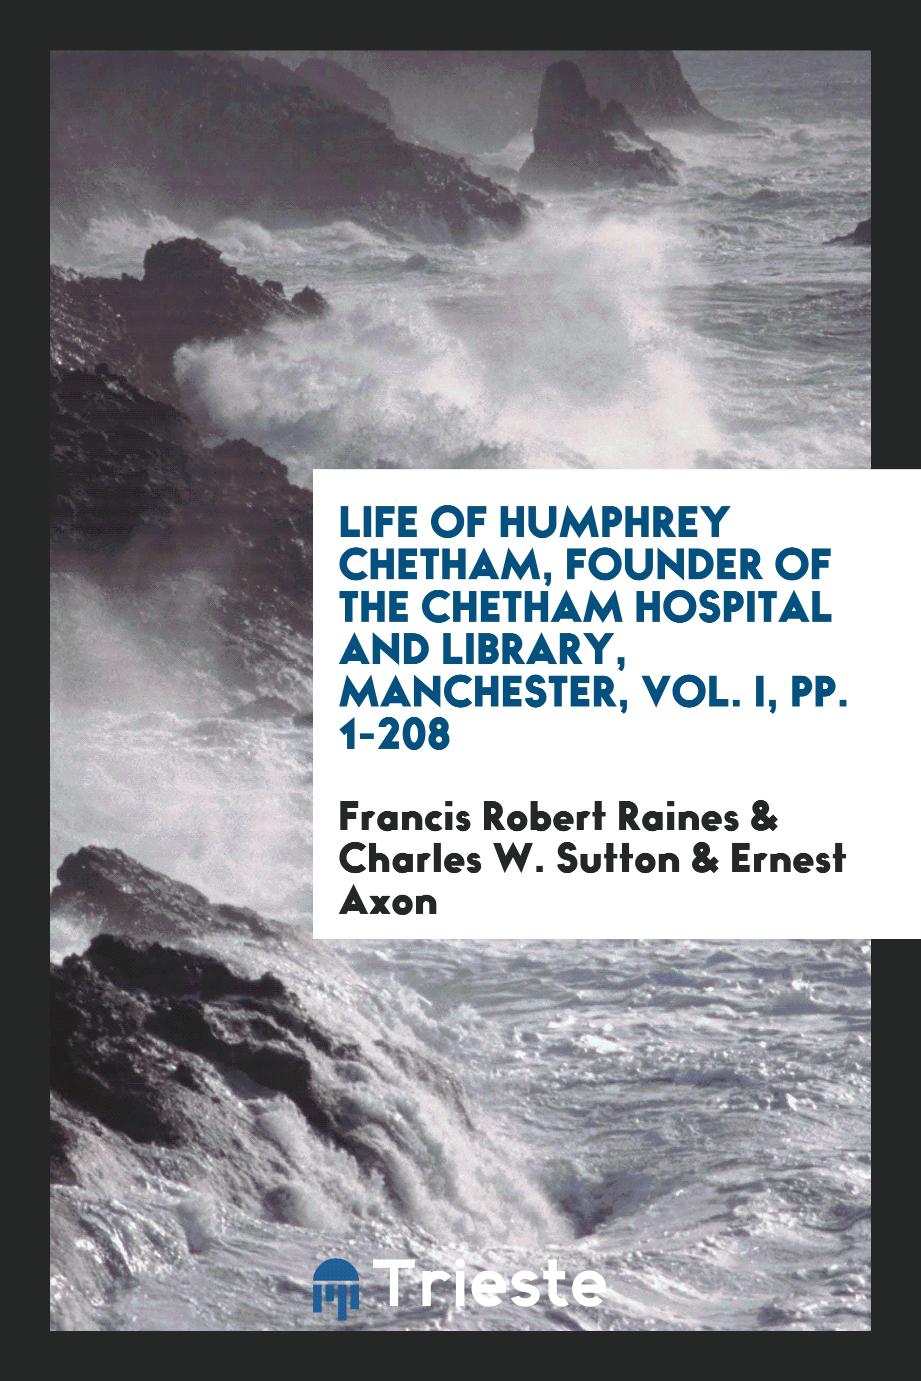 Life of Humphrey Chetham, Founder of the Chetham Hospital and Library, Manchester, Vol. I, pp. 1-208